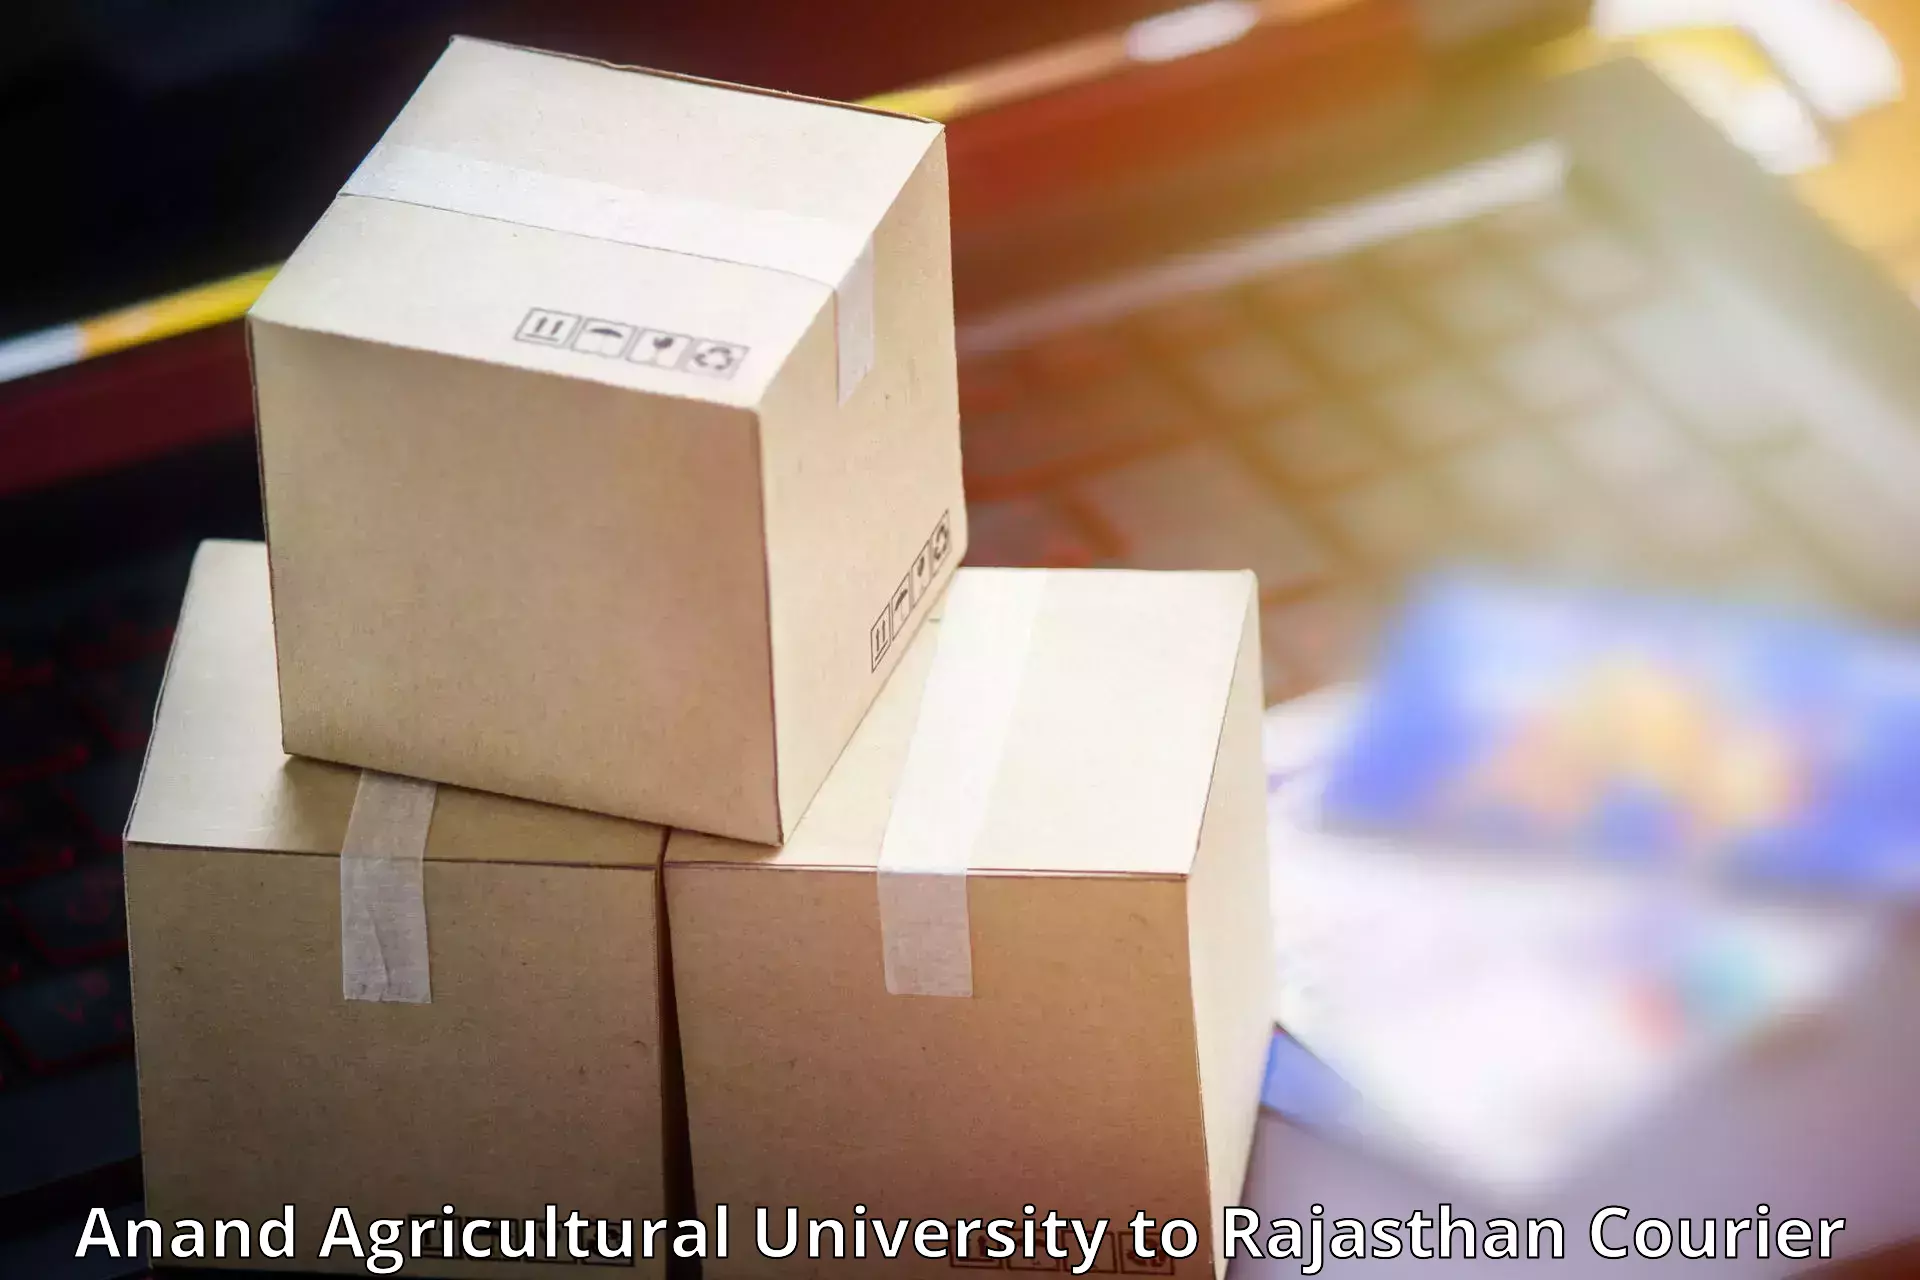 High-capacity shipping options Anand Agricultural University to Udaipurwati